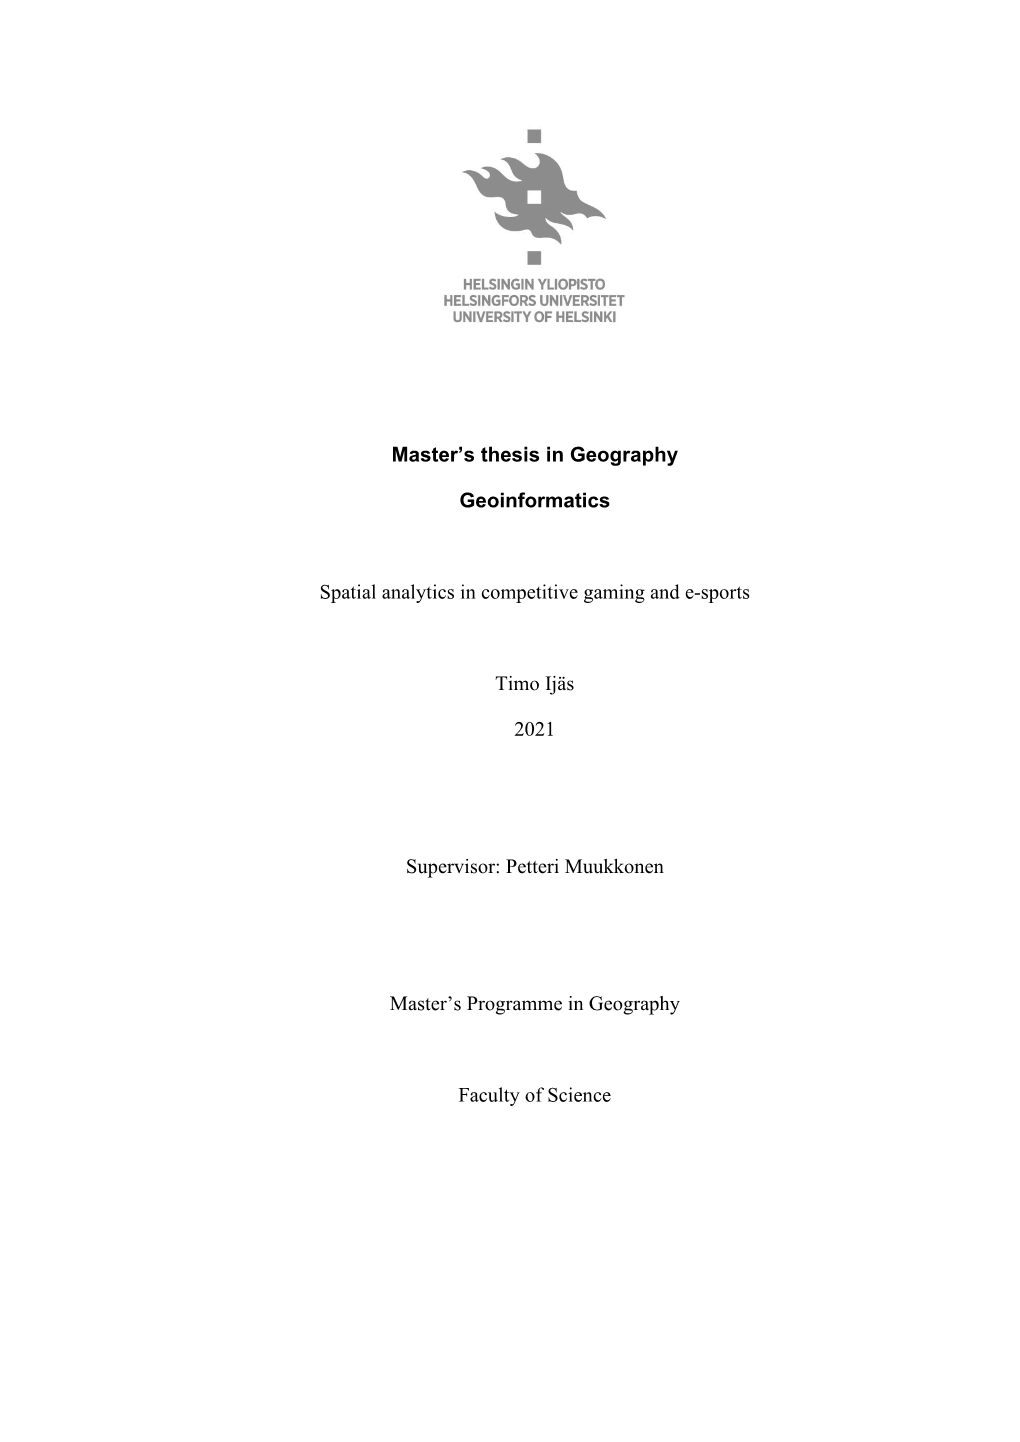 Master's Thesis in Geography Geoinformatics Spatial Analytics In